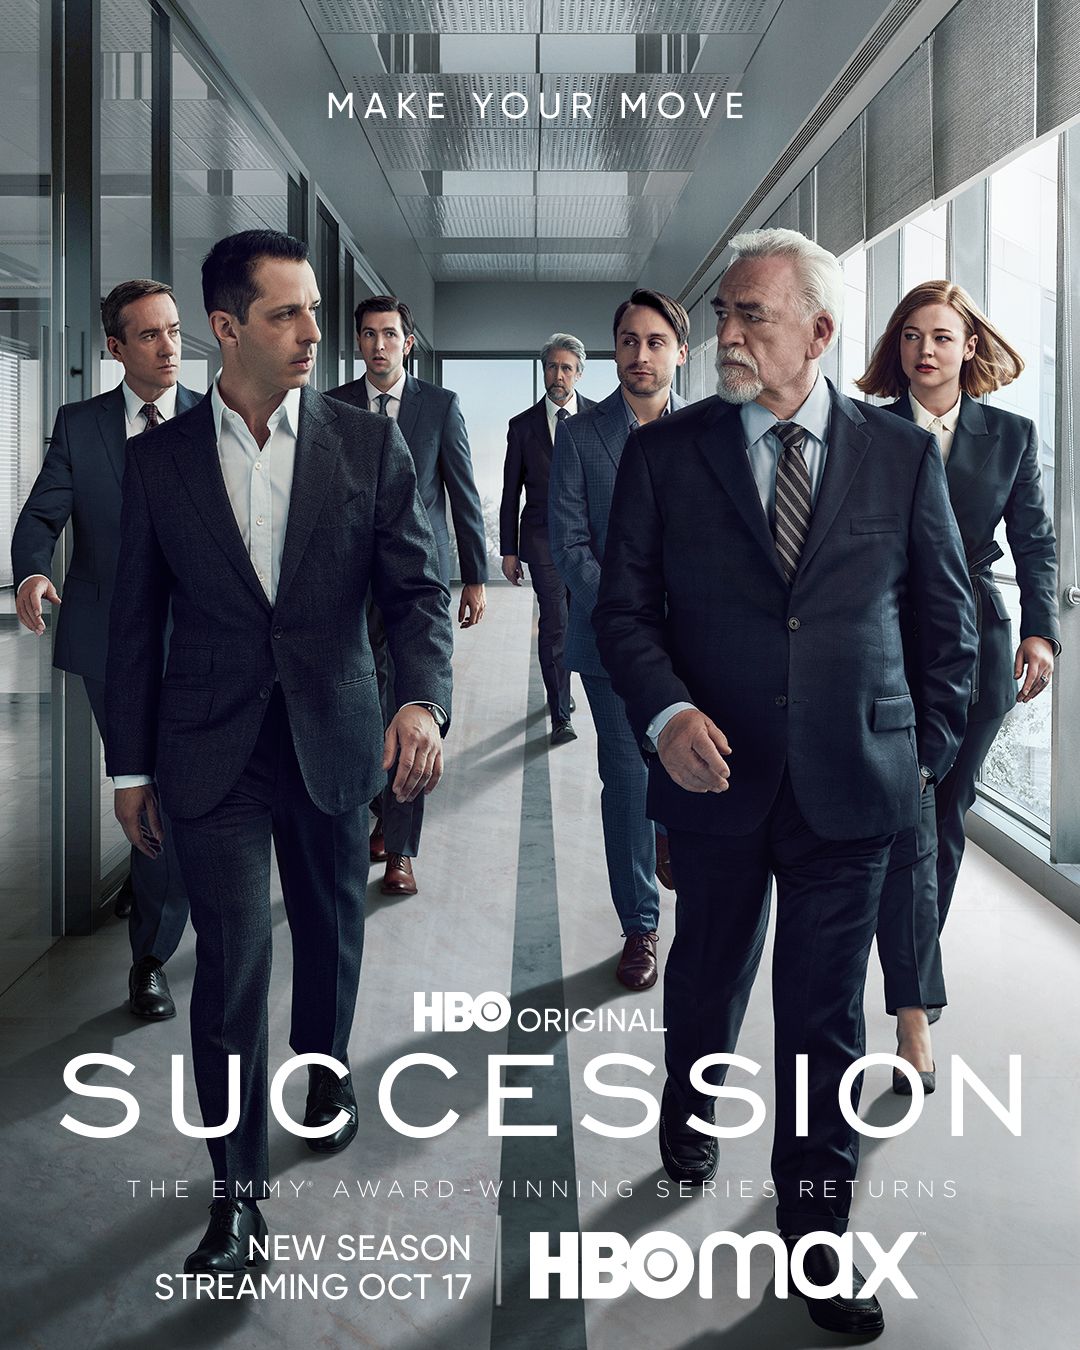 Succession Season 3 Reveals Release Date on HBO